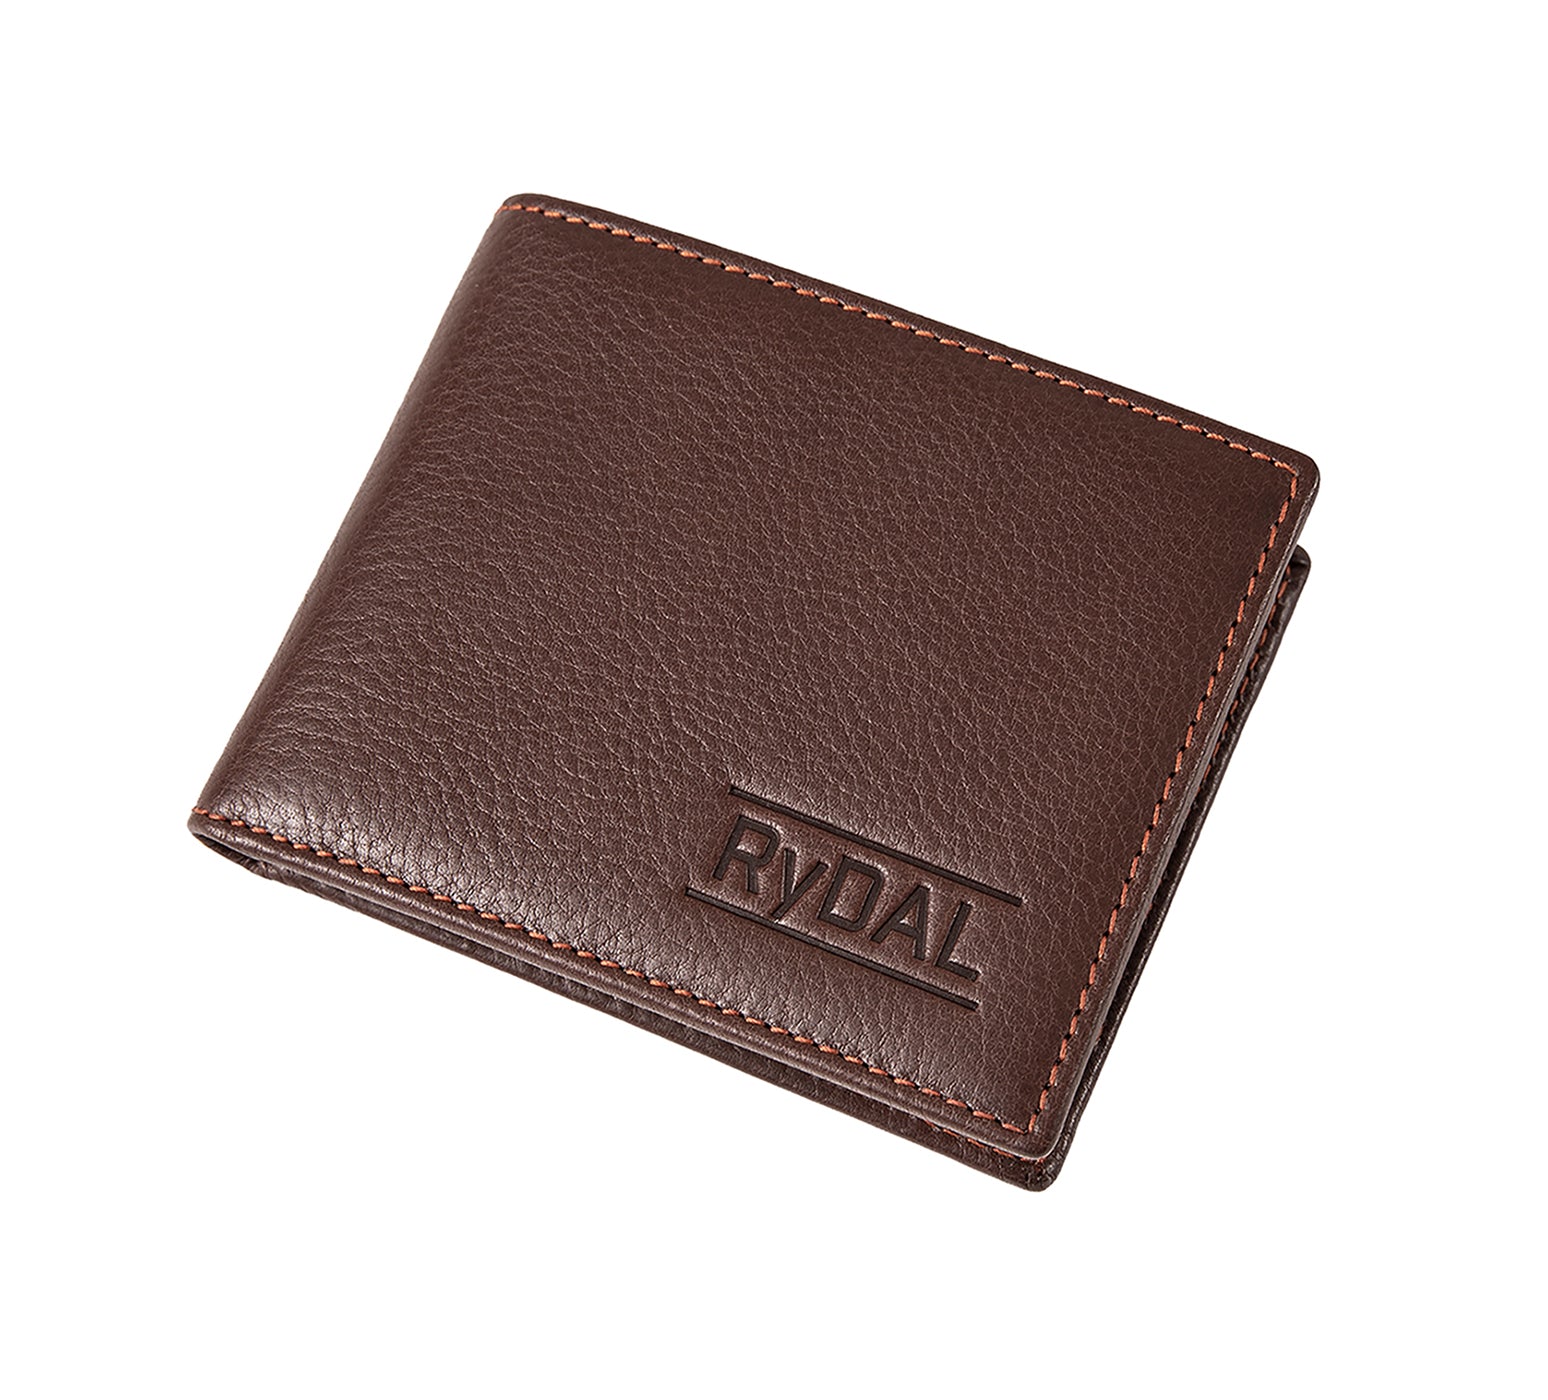 Mens Leather Wallet from Rydal in 'Dark Brown/Rust' showing wallet closed.